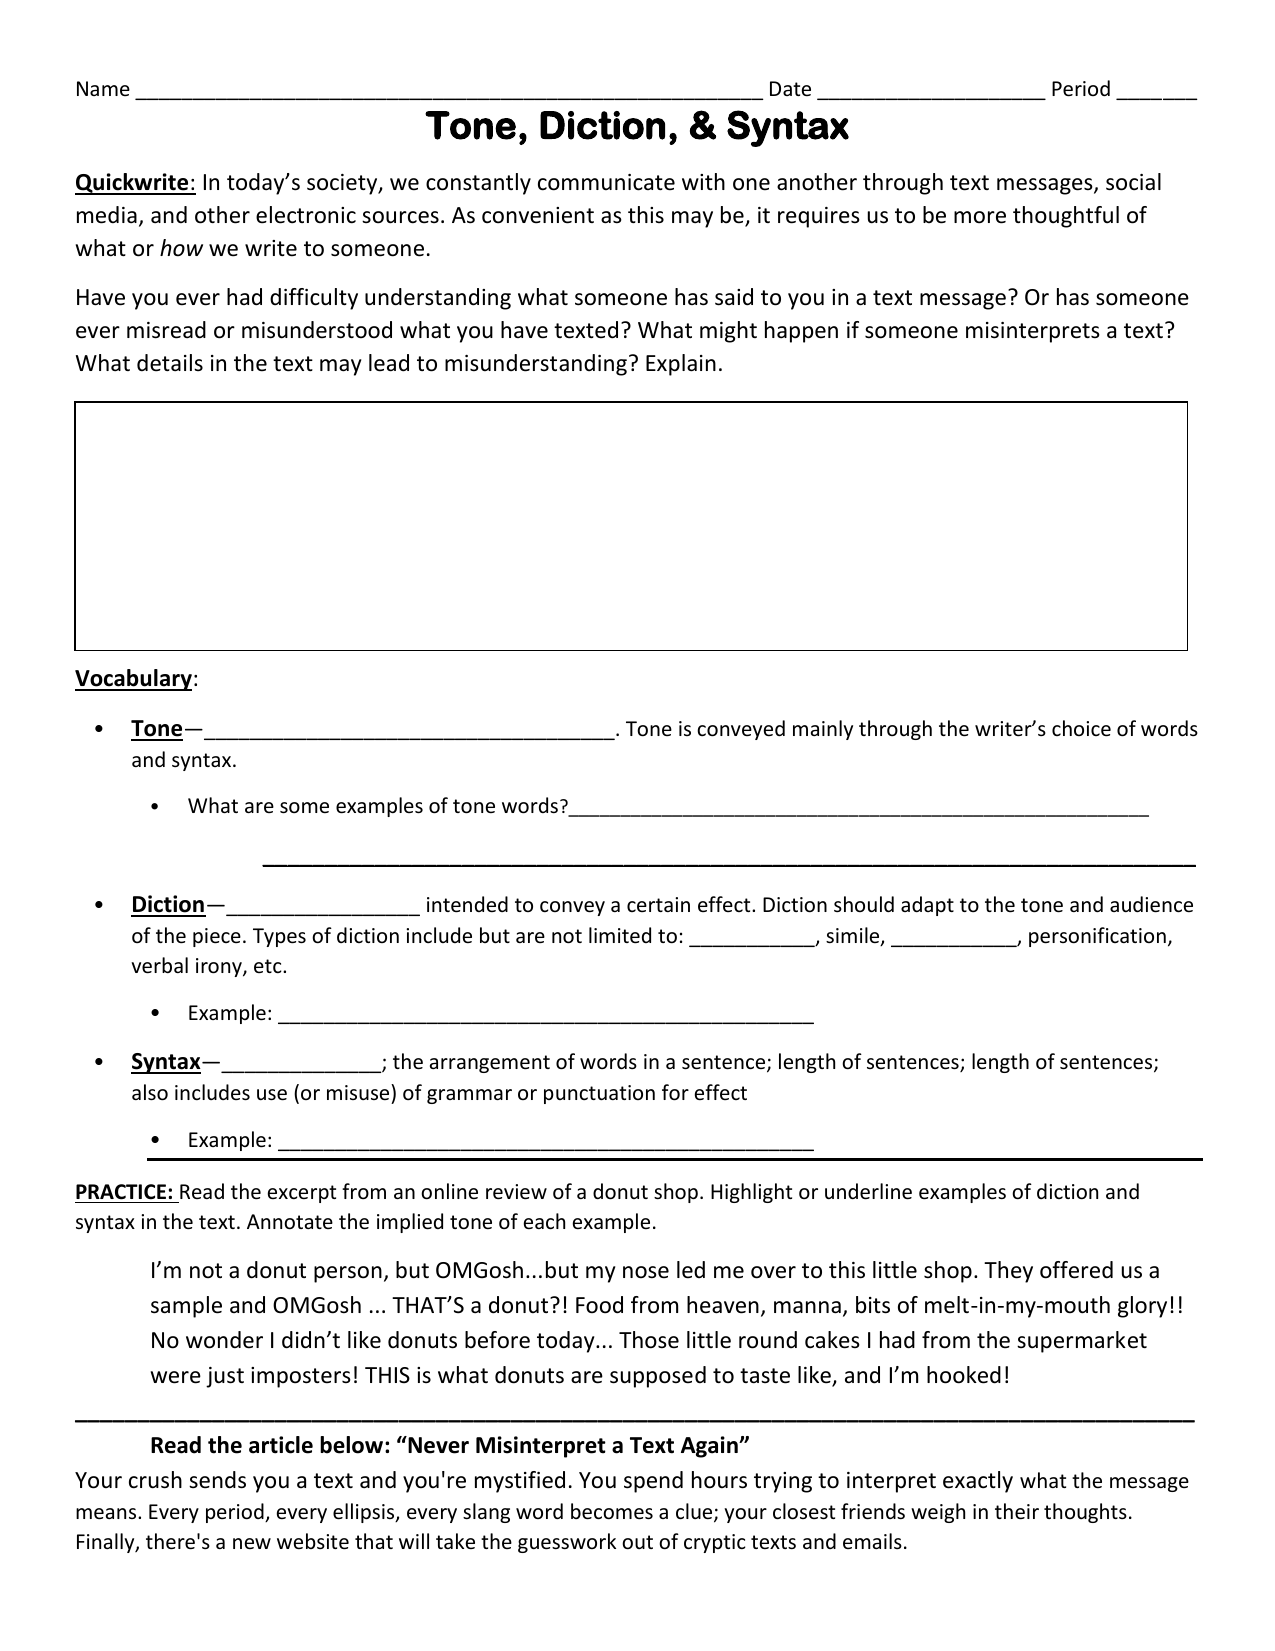 verb-to-be-multiple-choice-key-included-esl-worksheet-by-katiana